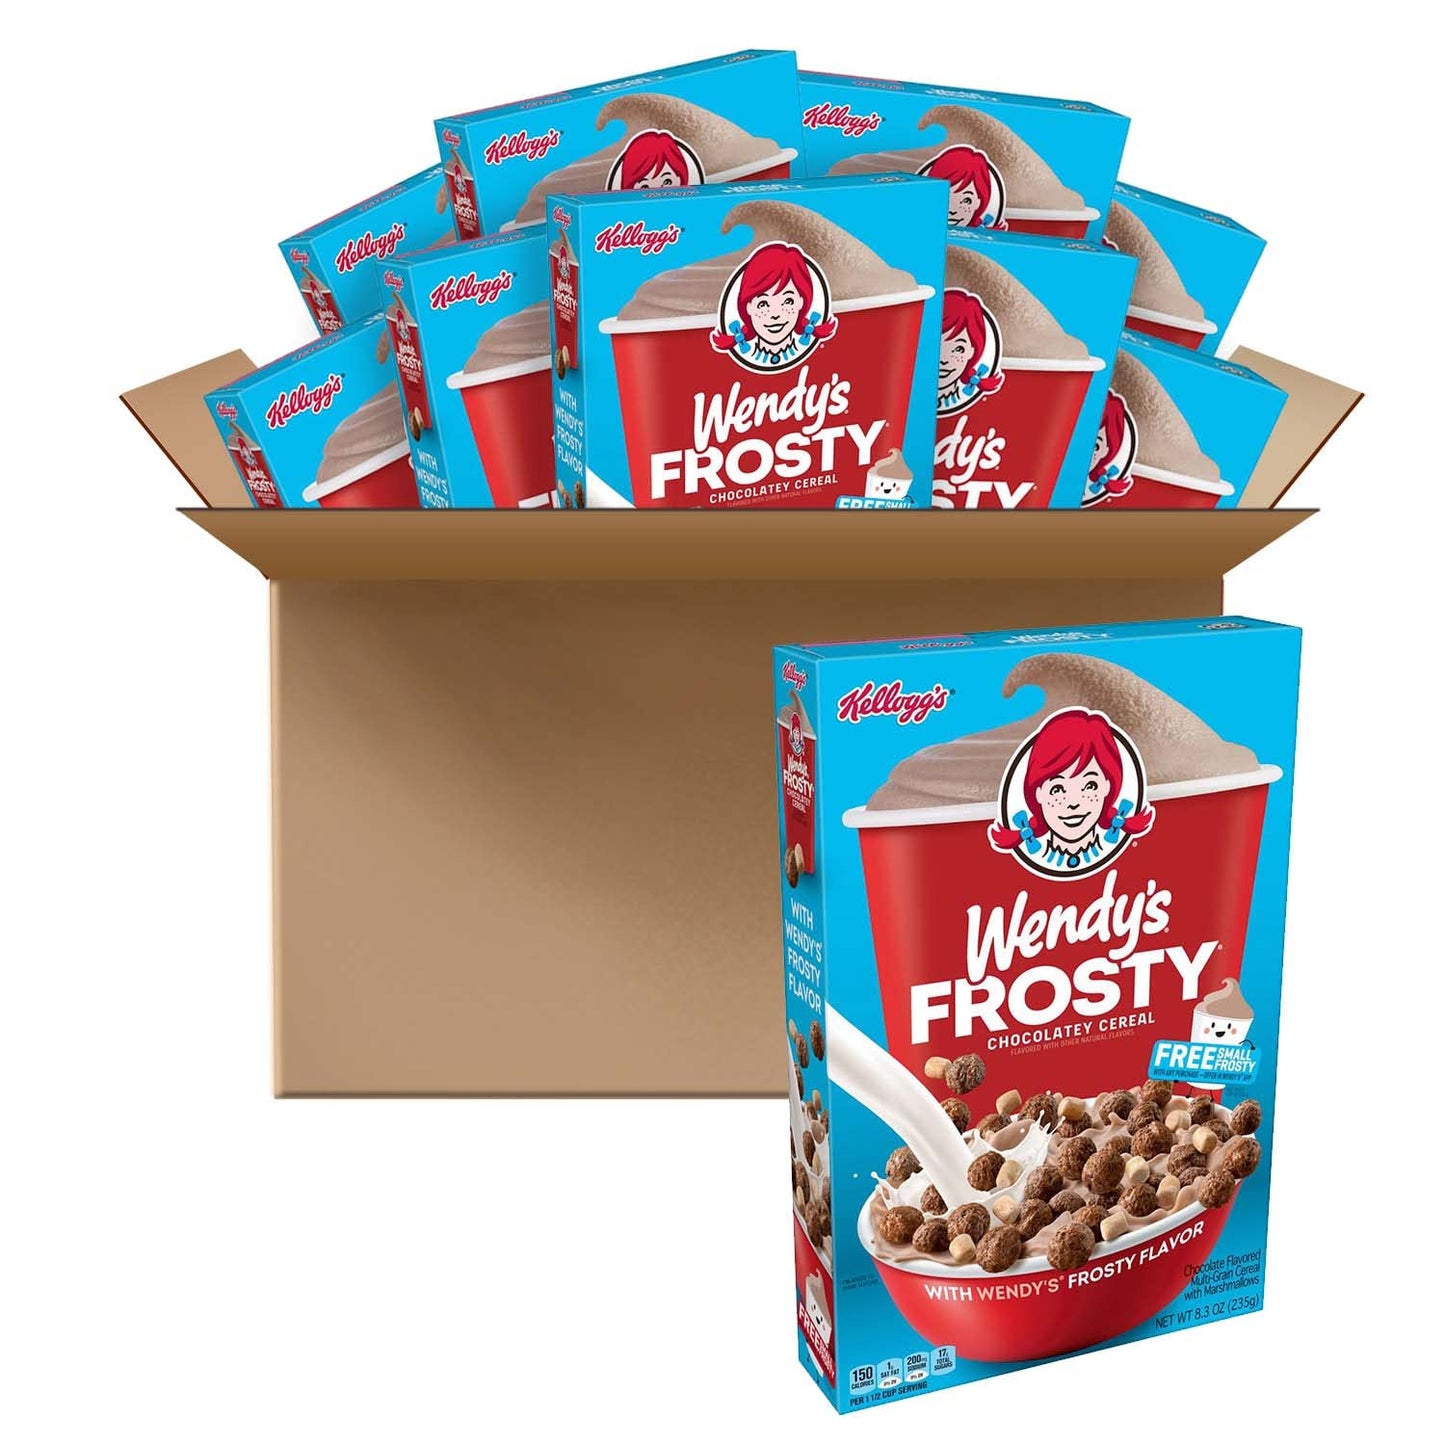 Kellogg's Wendy's Frosty Breakfast Cereal, 5.2lb Case (10 Boxes), 8.3 Ounce (Pack of 10)